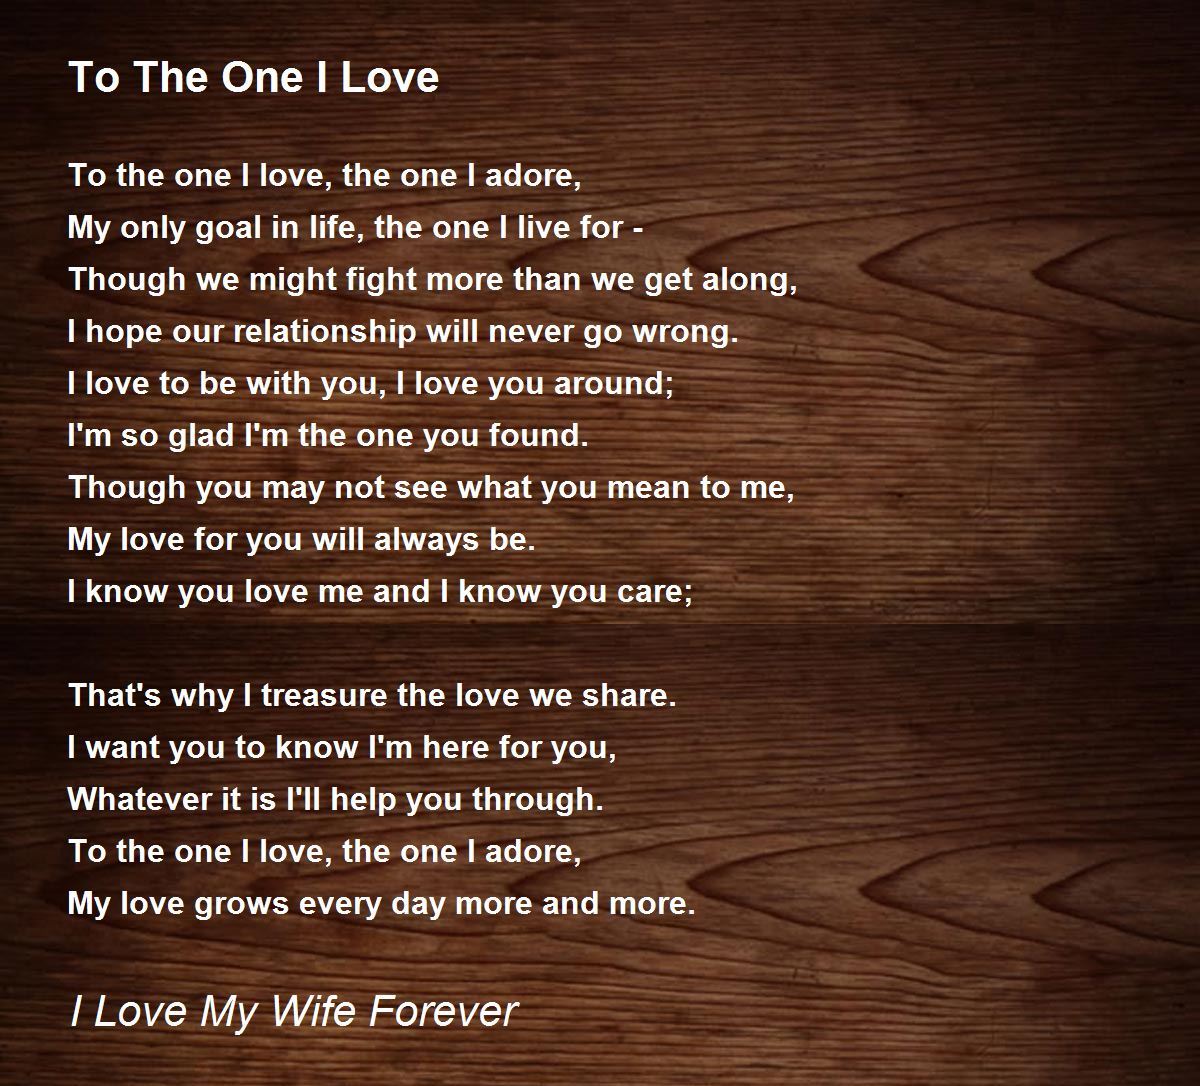 Will you be my wife poems